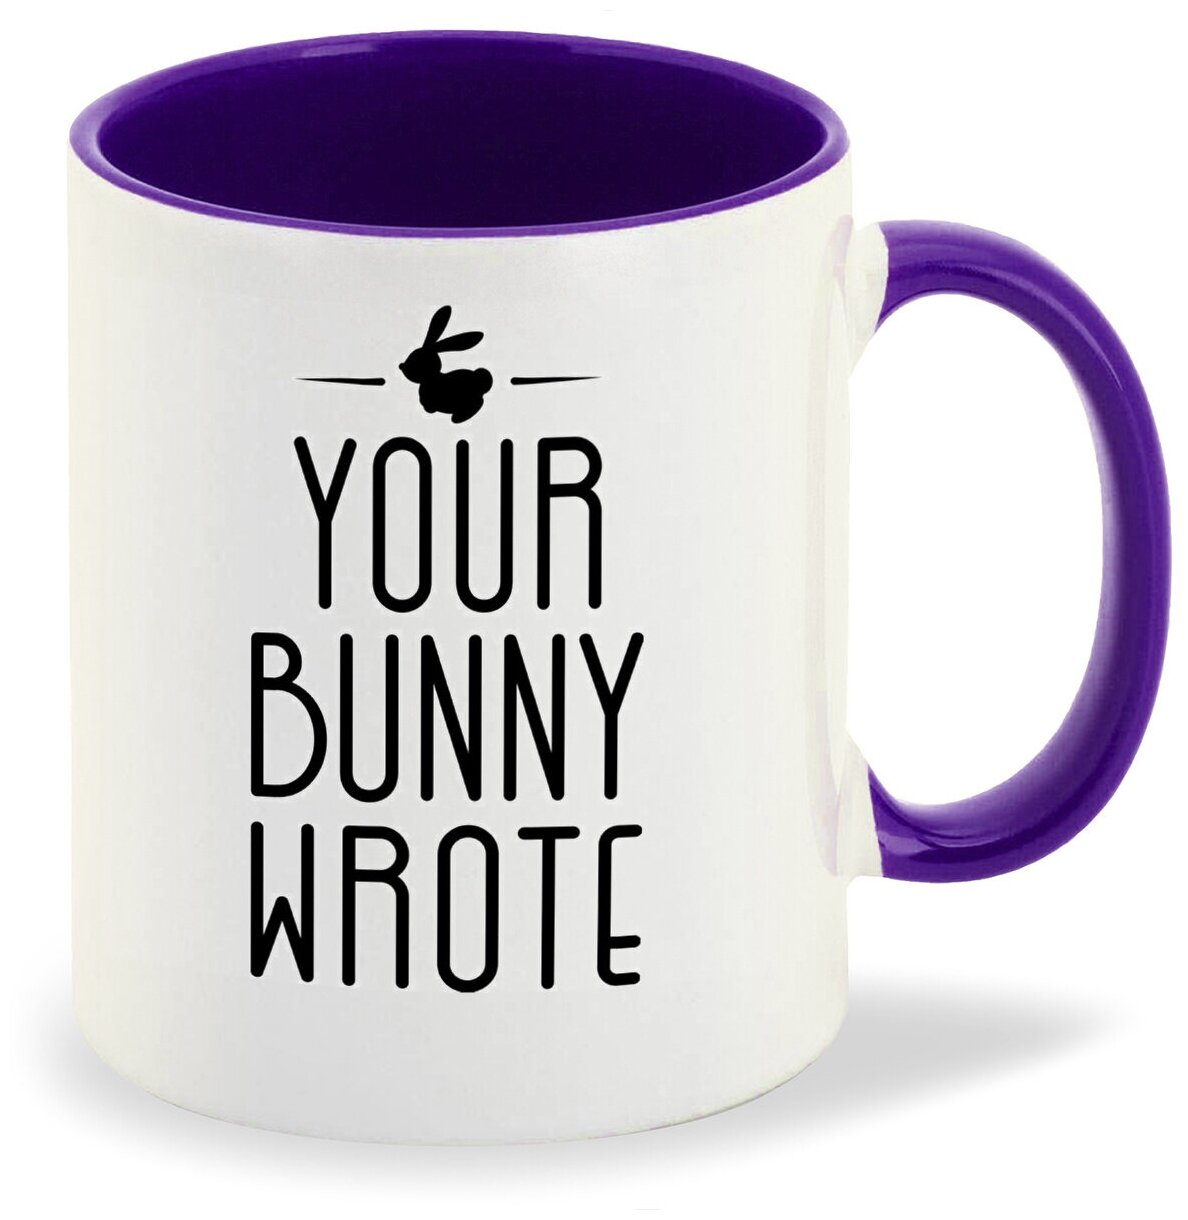 Your bunny wrote steam фото 63